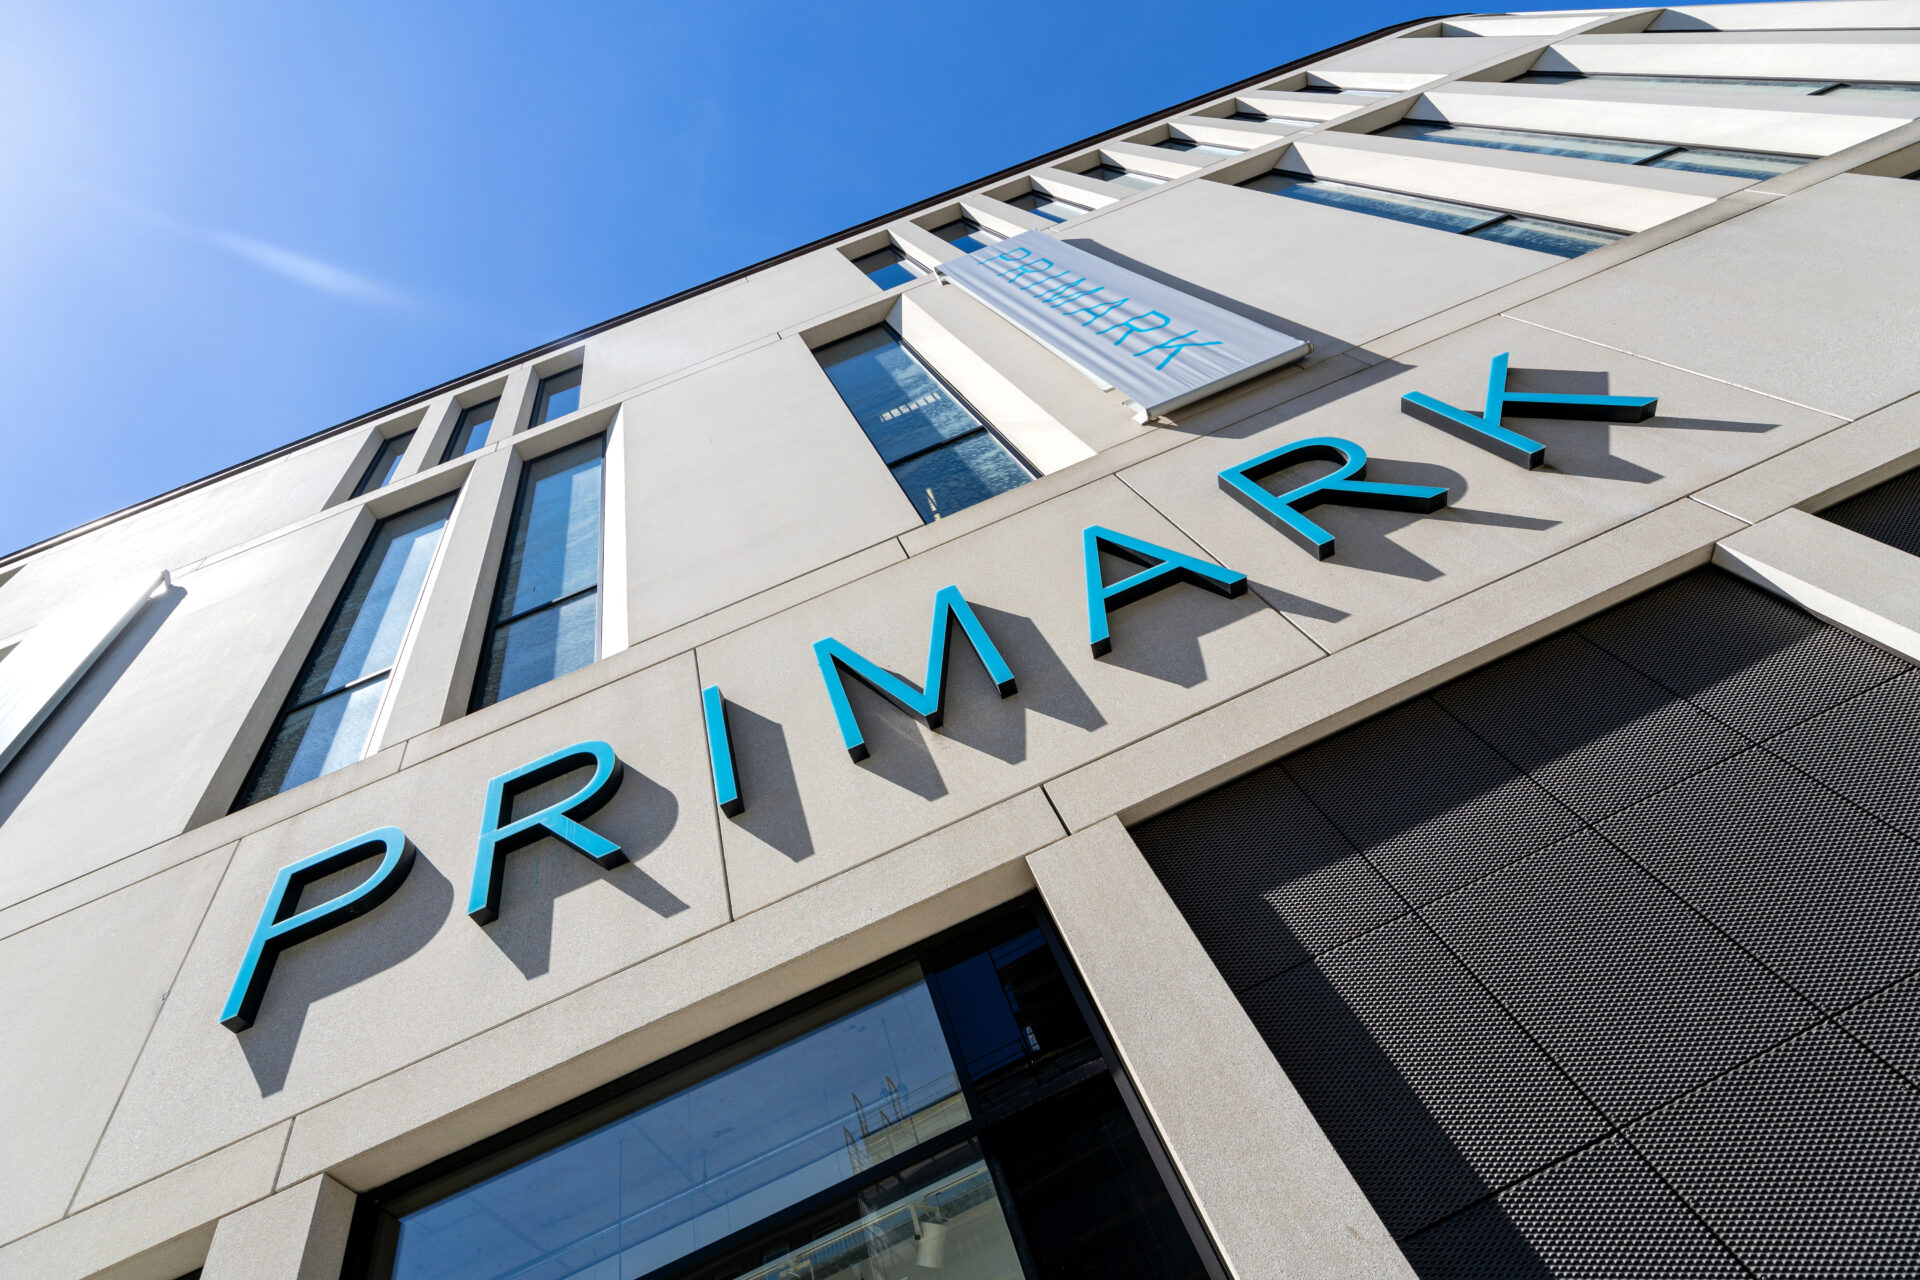 WHERE IS THE BEST PRIMARK STORE IN LONDON?